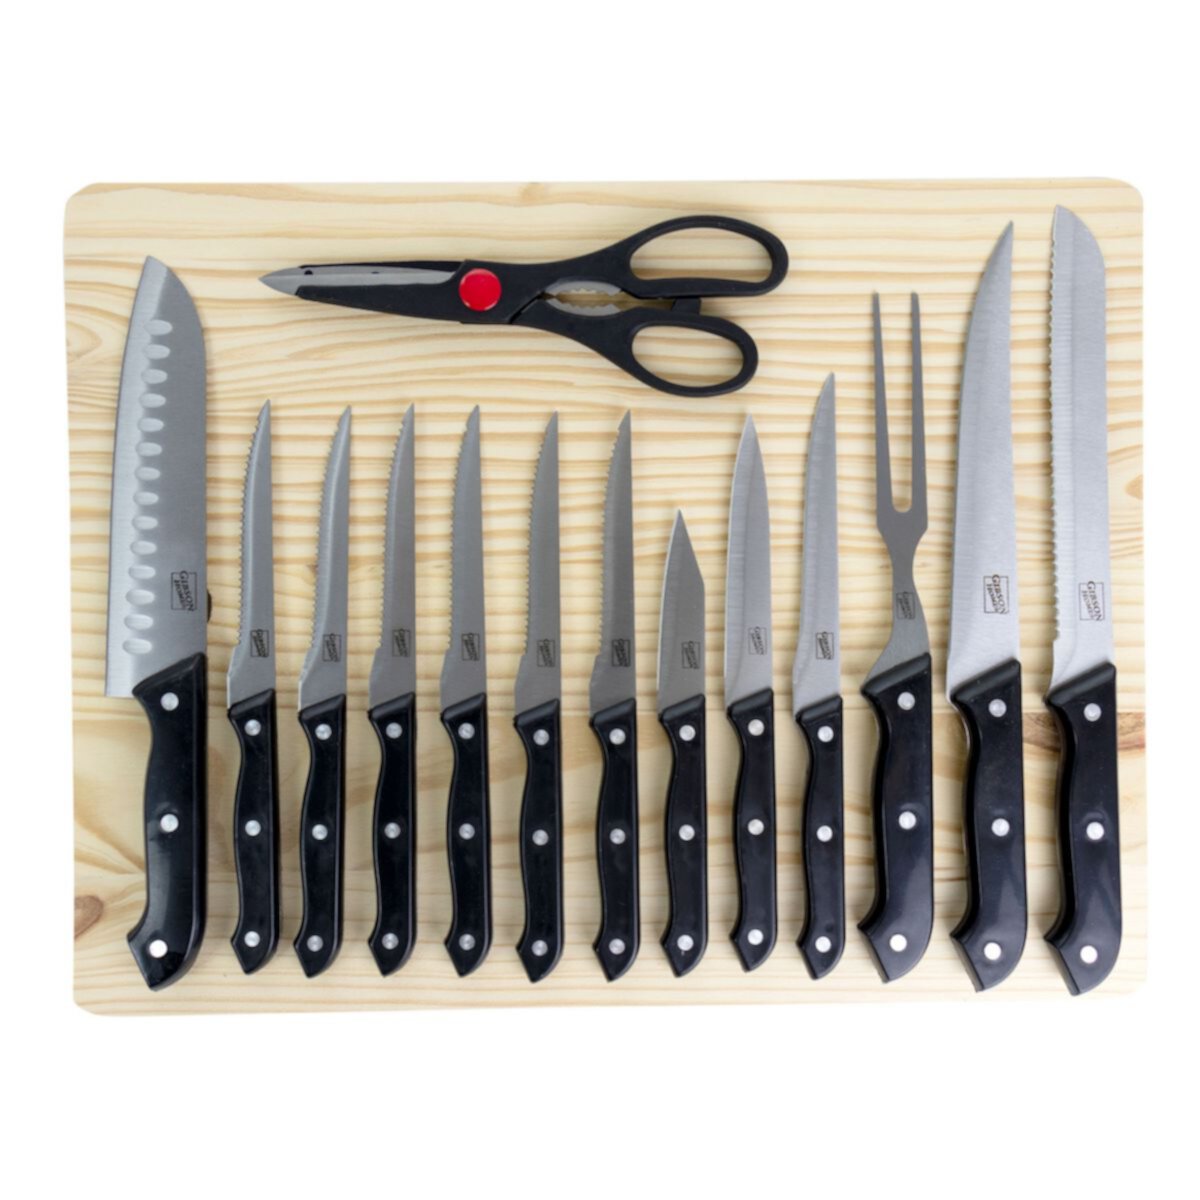 Gibson Home Wildcraft 15 Piece Stainless Steel Cutlery Set with Pine Wood Cutting Board Gibson Home